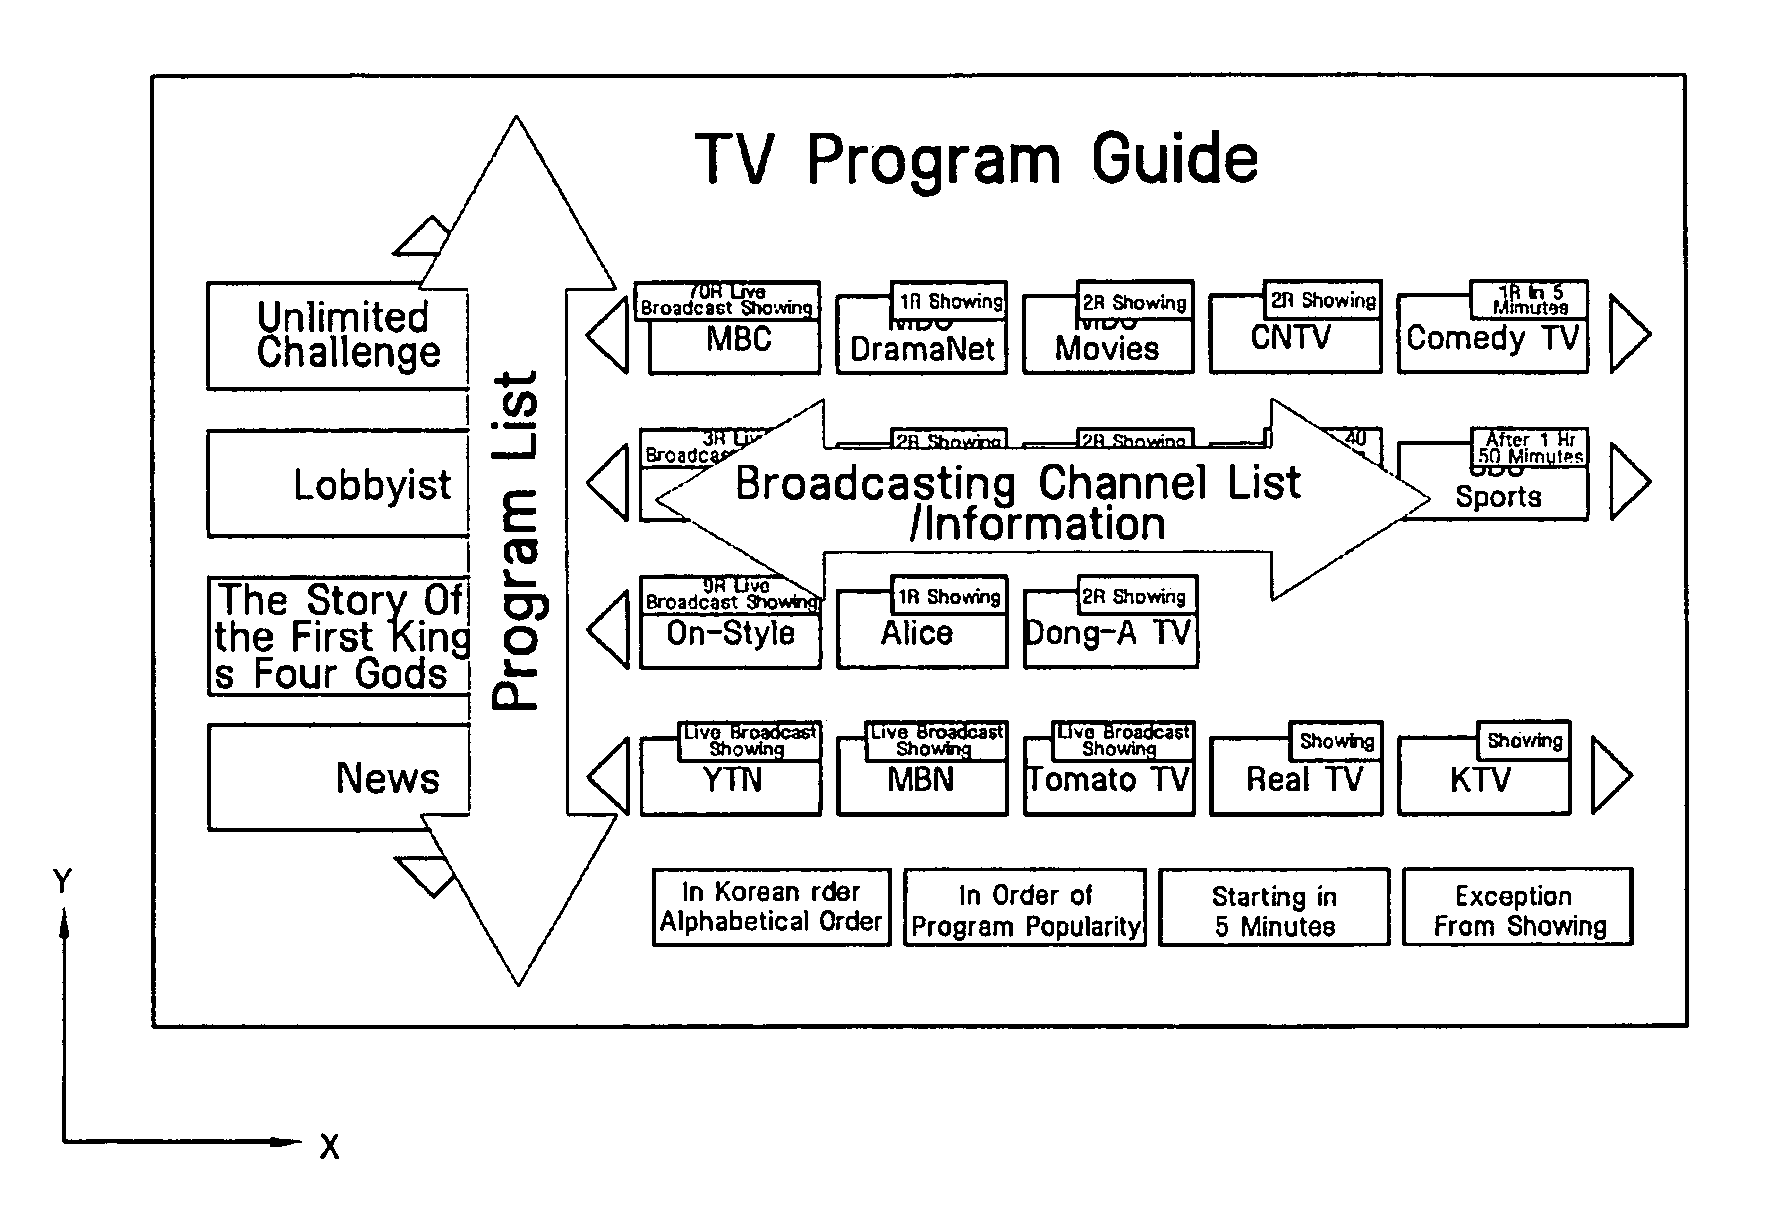 Program-based electronic program guide system and method thereof